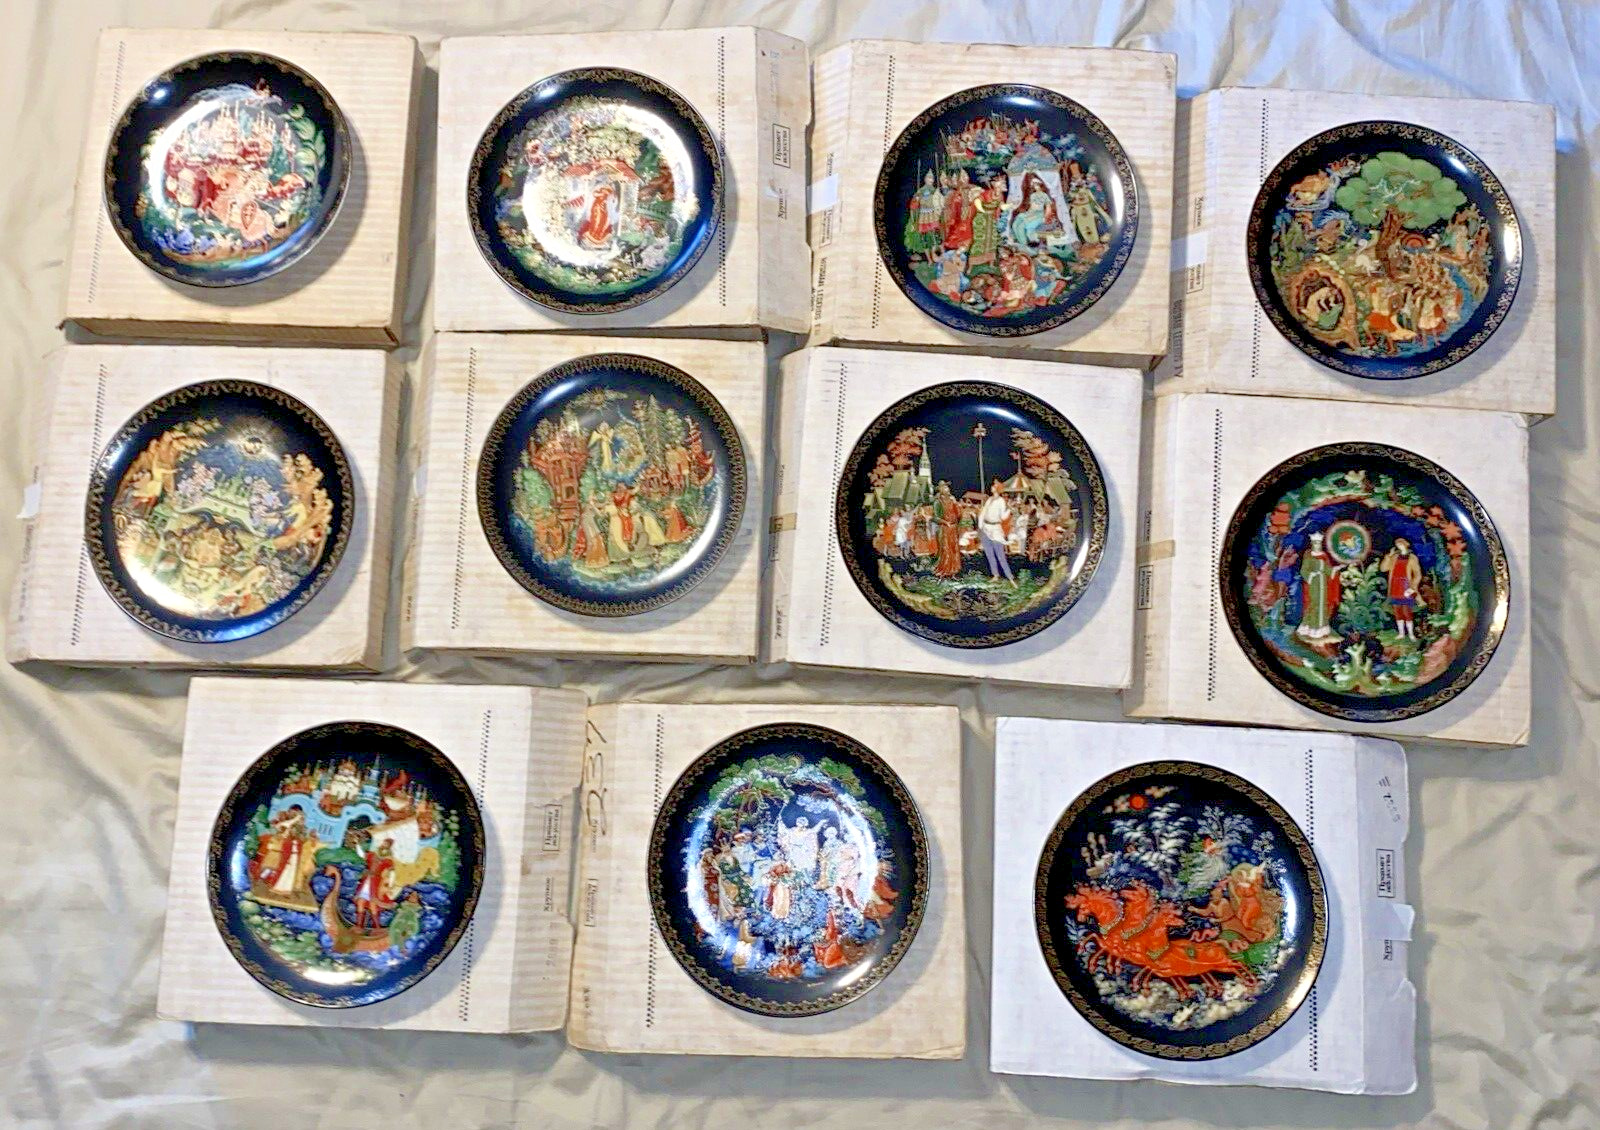 SET OF 11 RUSSIAN LEGENDS PORCELAIN COLLECTOR PLATES IN BOX WITH CERTIFICATES